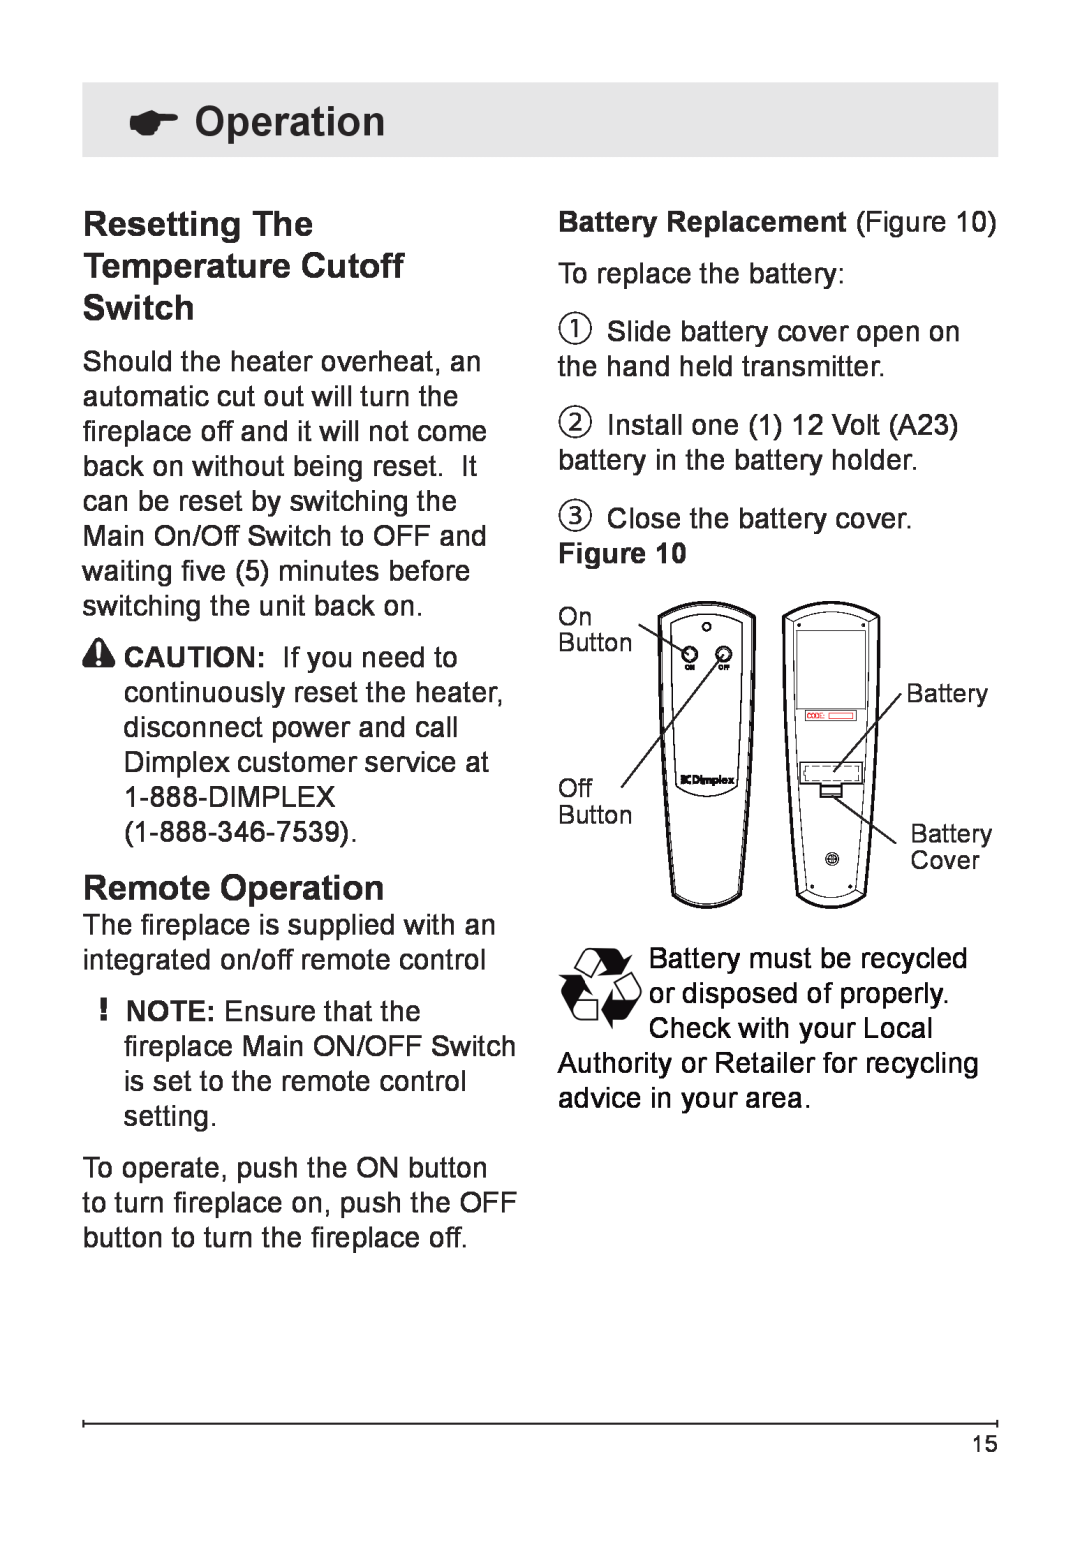 Dimplex VCX1525-WH owner manual Resetting The Temperature Cutoff Switch, Remote Operation, Battery Replacement Figure 